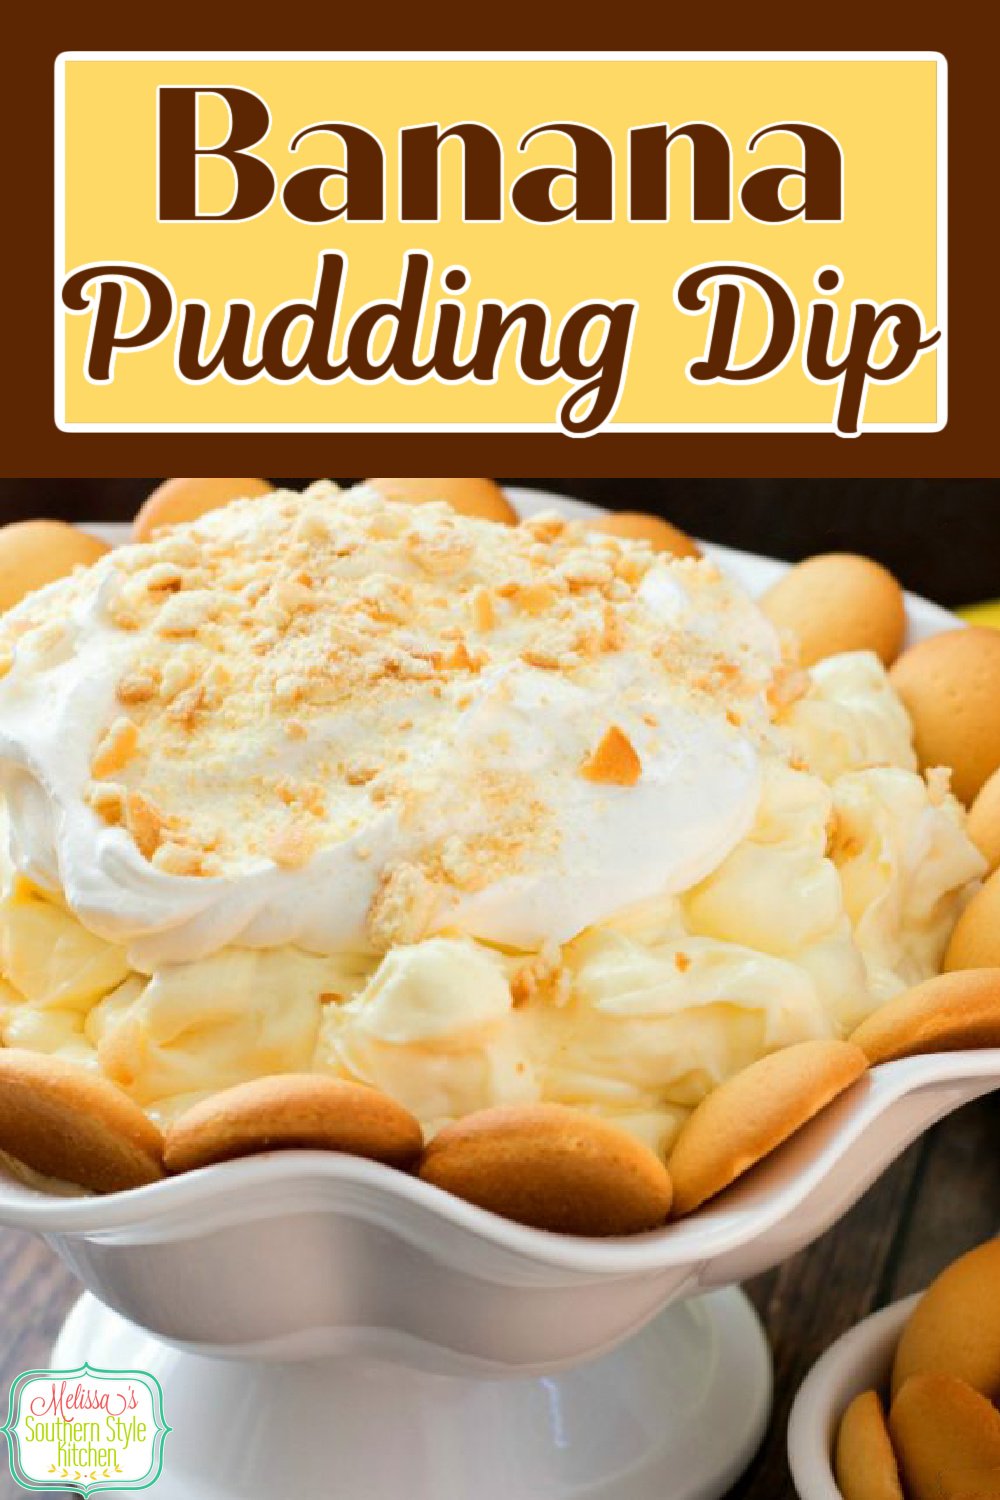 Banana pudding fan will flip for this dessert served with vanilla wafers for dipping! #bananapudding #bananas #pudding #diprecipes #bananapuddingdip #sweets #desserts #dessertfoodrecipes #easyrecipes #holidayrecipes #southernfood #southernrecipes via @melissasssk